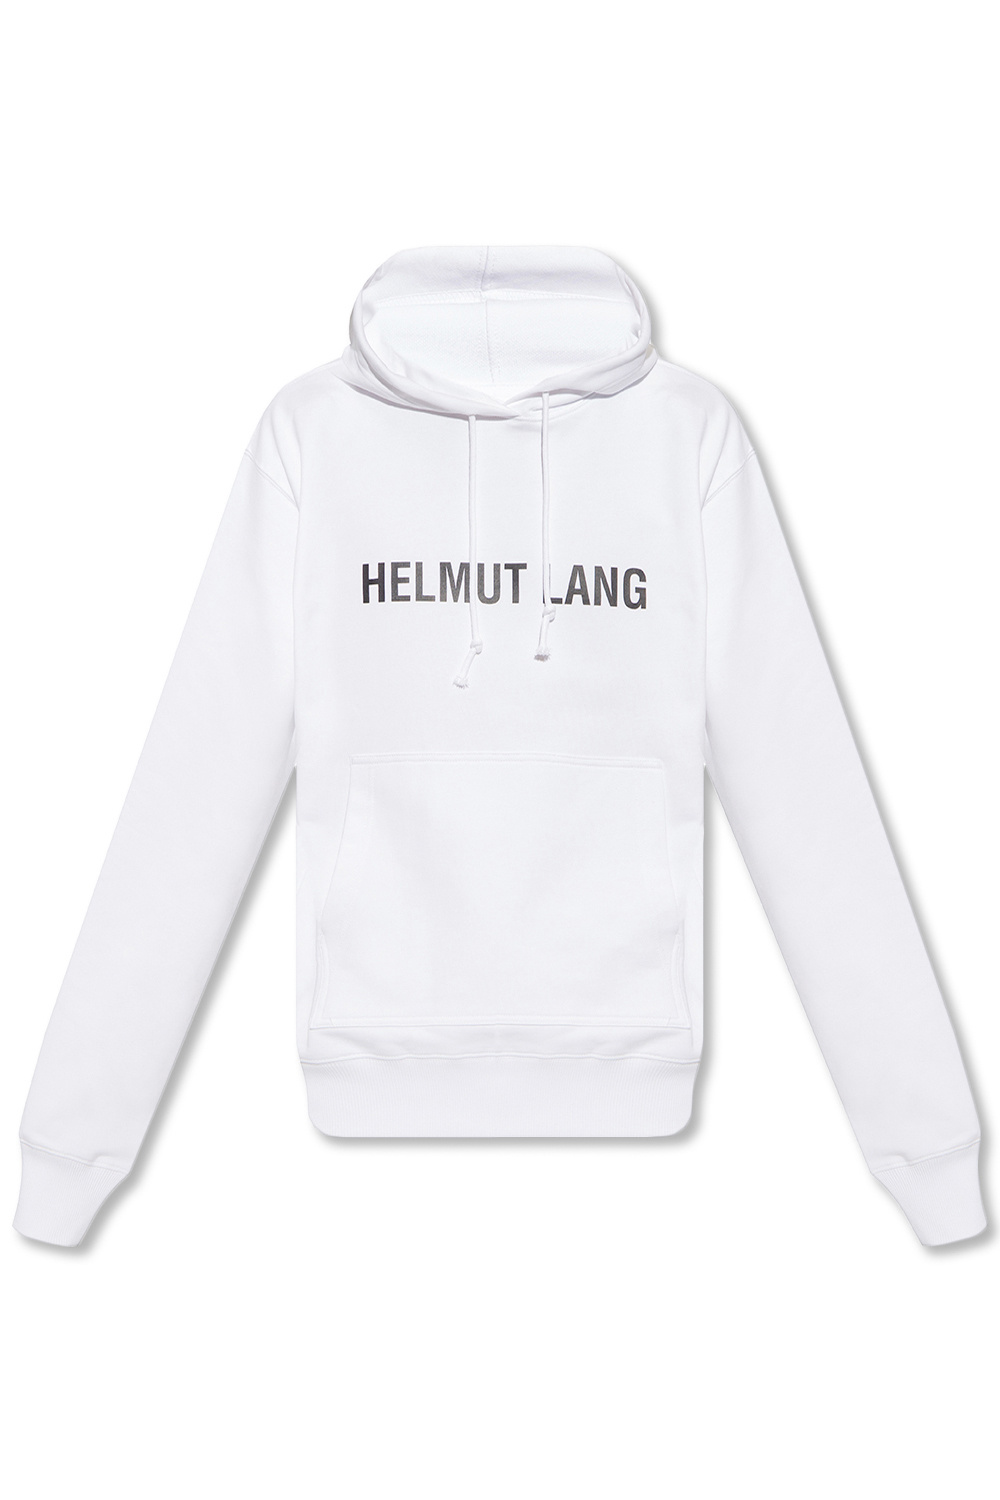 IetpShops Italy - White fit Hoodie with logo Helmut Lang - piqué band  collar shirt